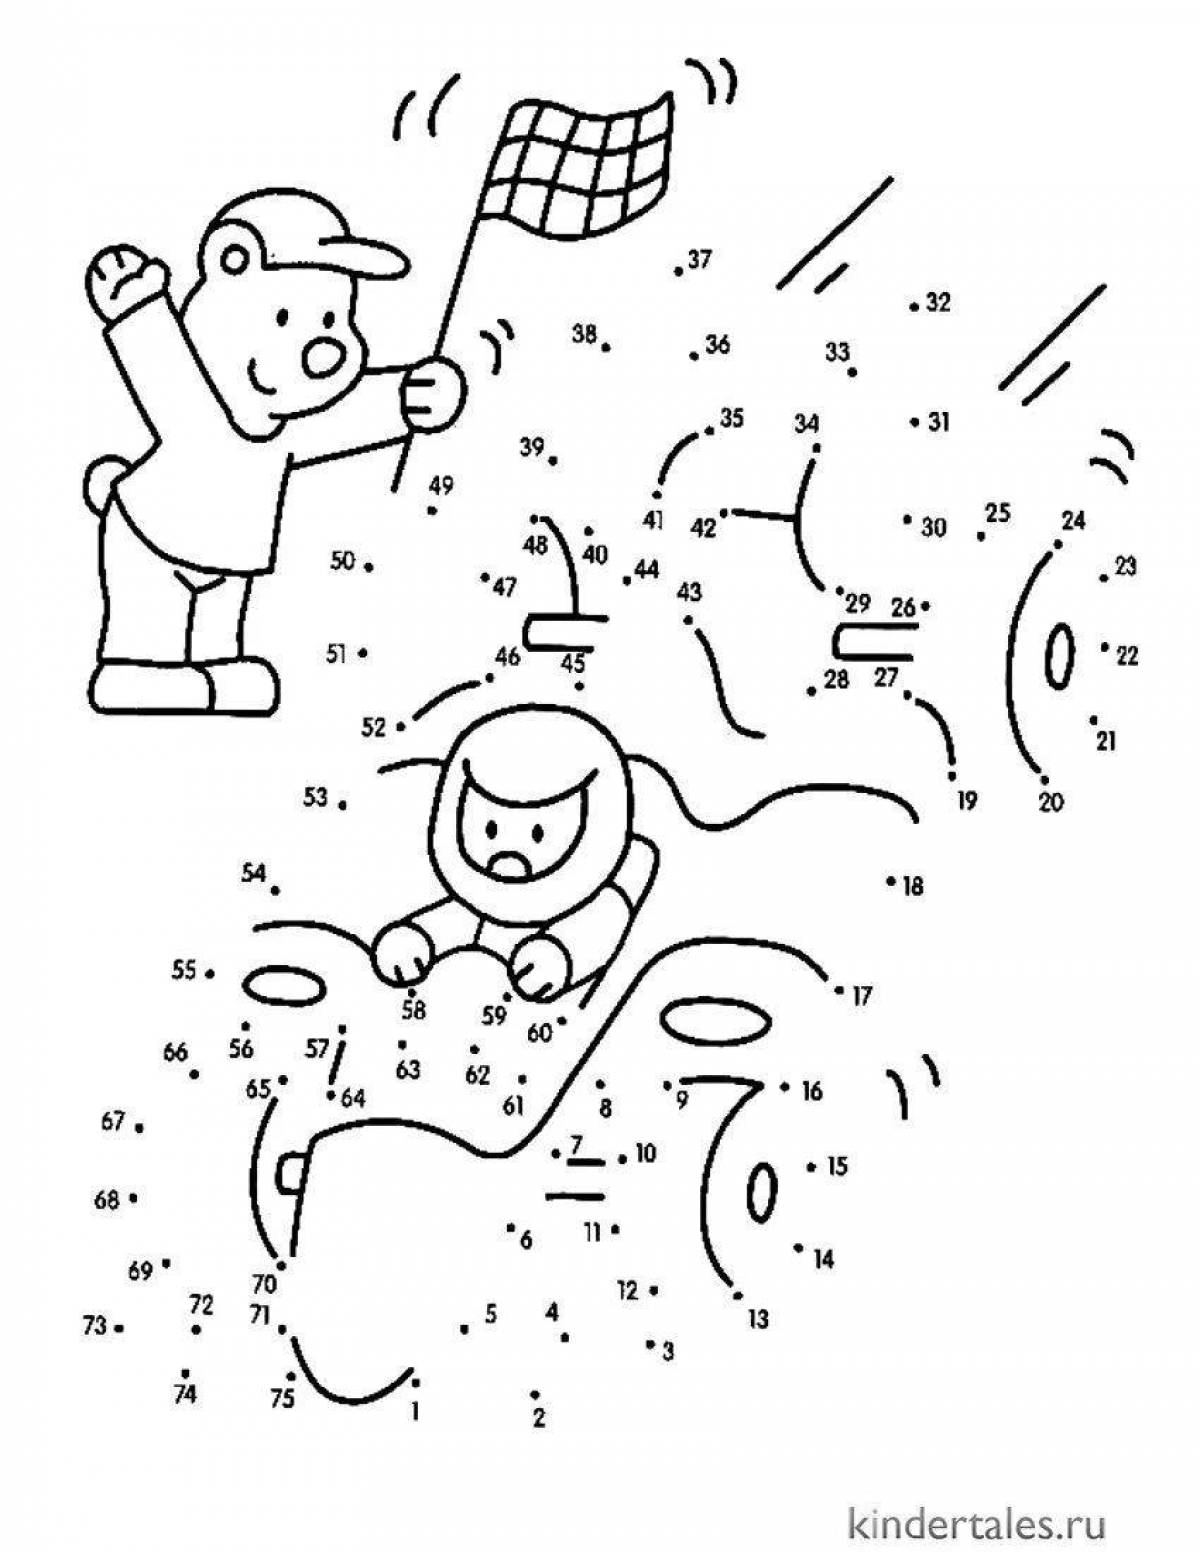 Coloring-journey coloring page from 1 to 100